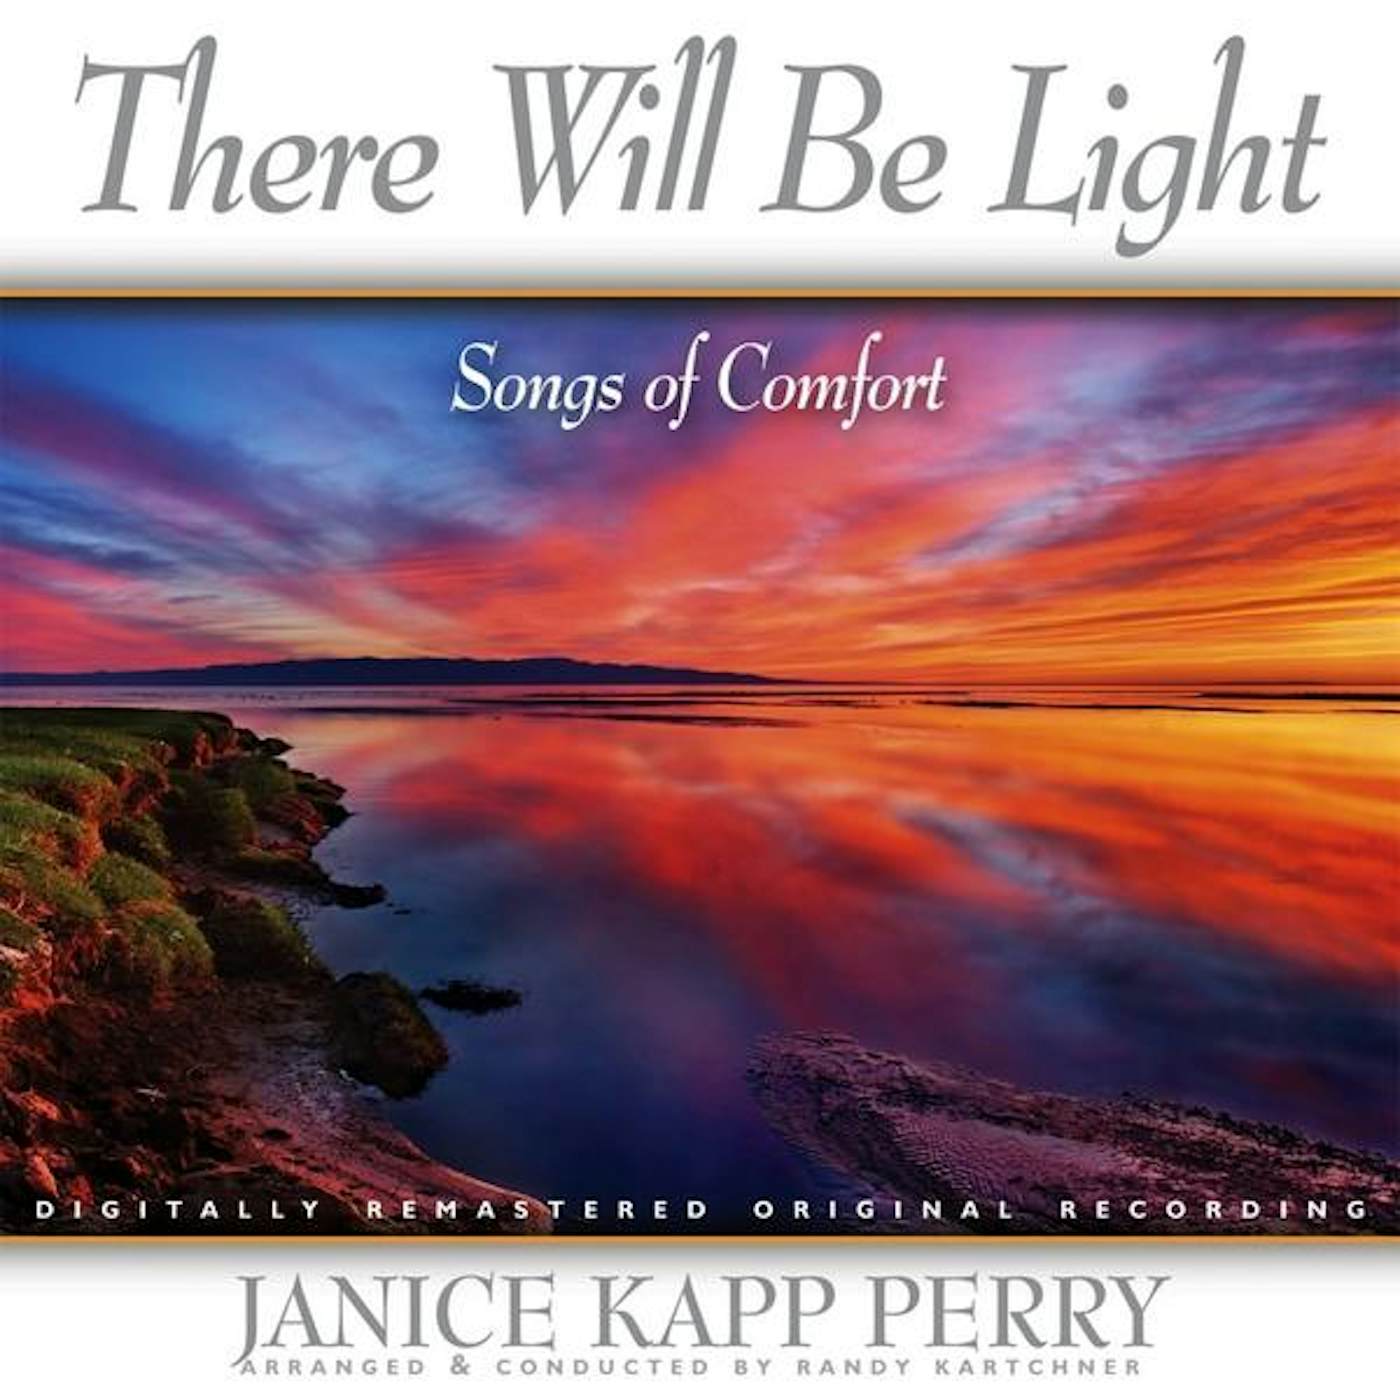 Janice Kapp Perry THERE WILL BE LIGHT CD